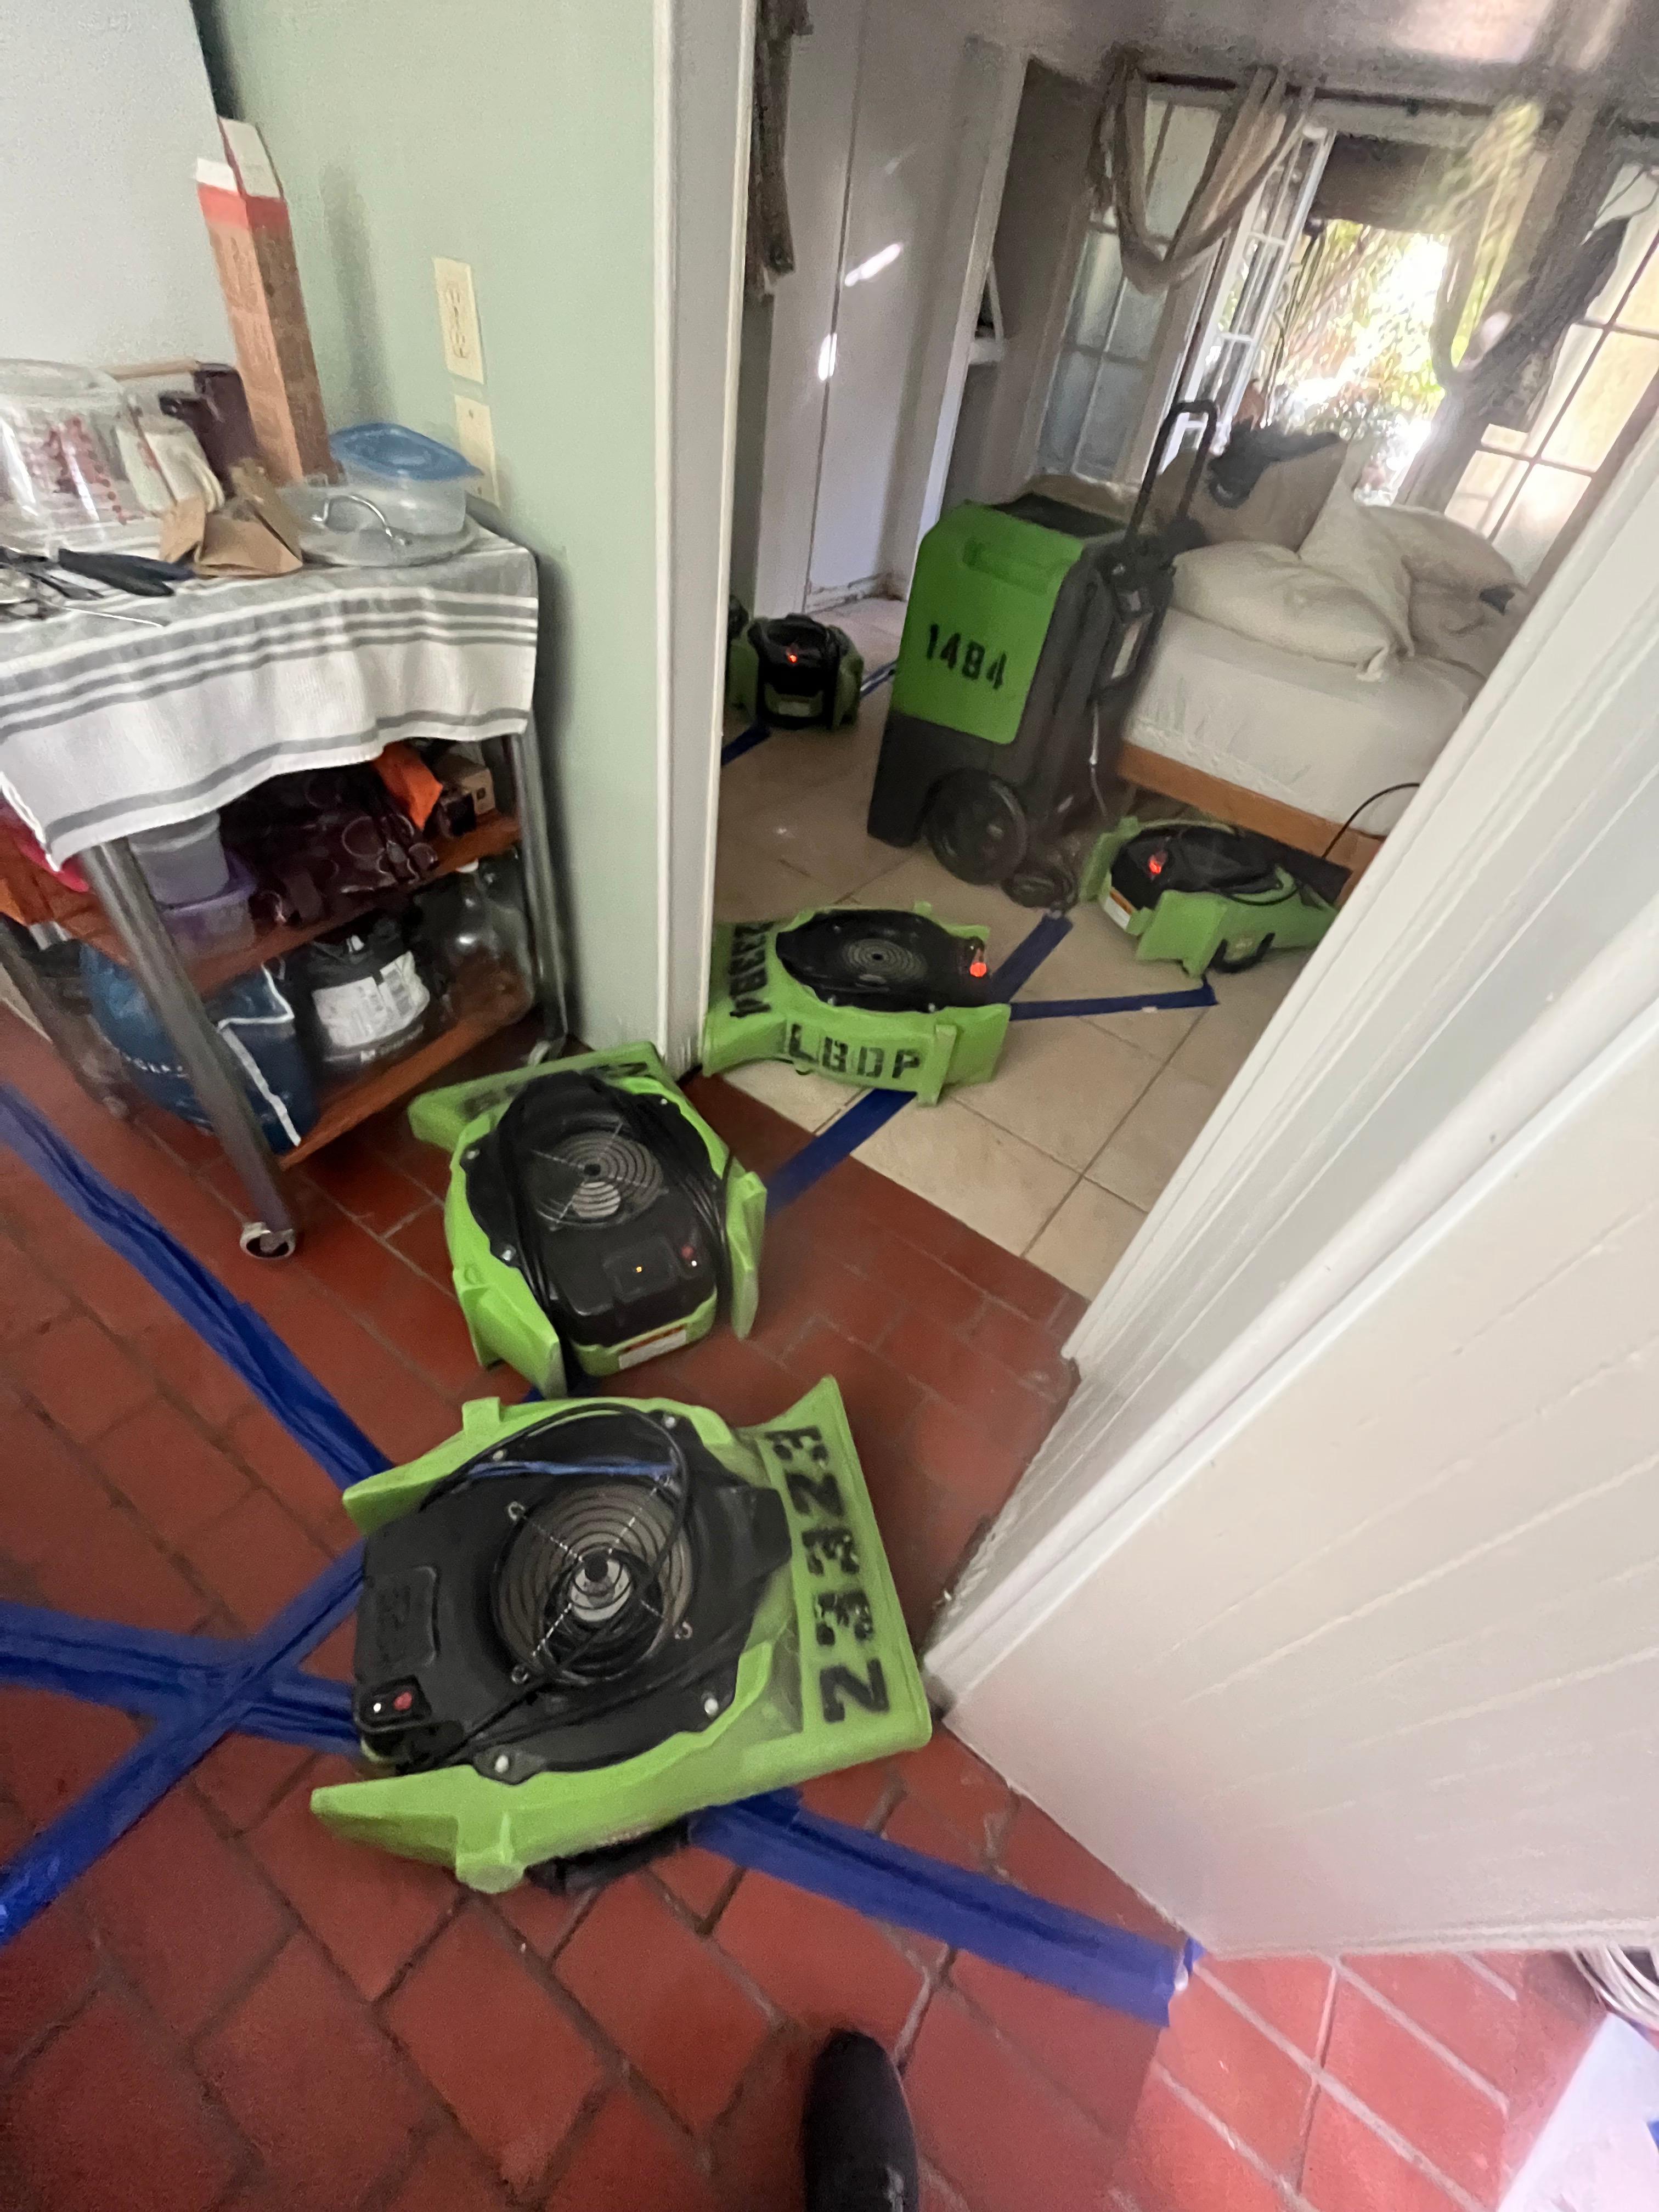 Dealing with water, fire, or mold damage is not easy. But with our 24/7 restoration services, we'll be by your side every step of the way to help you get your life back on track. Give SERVPRO of  Laguna Beach/ Dana Point a call today!